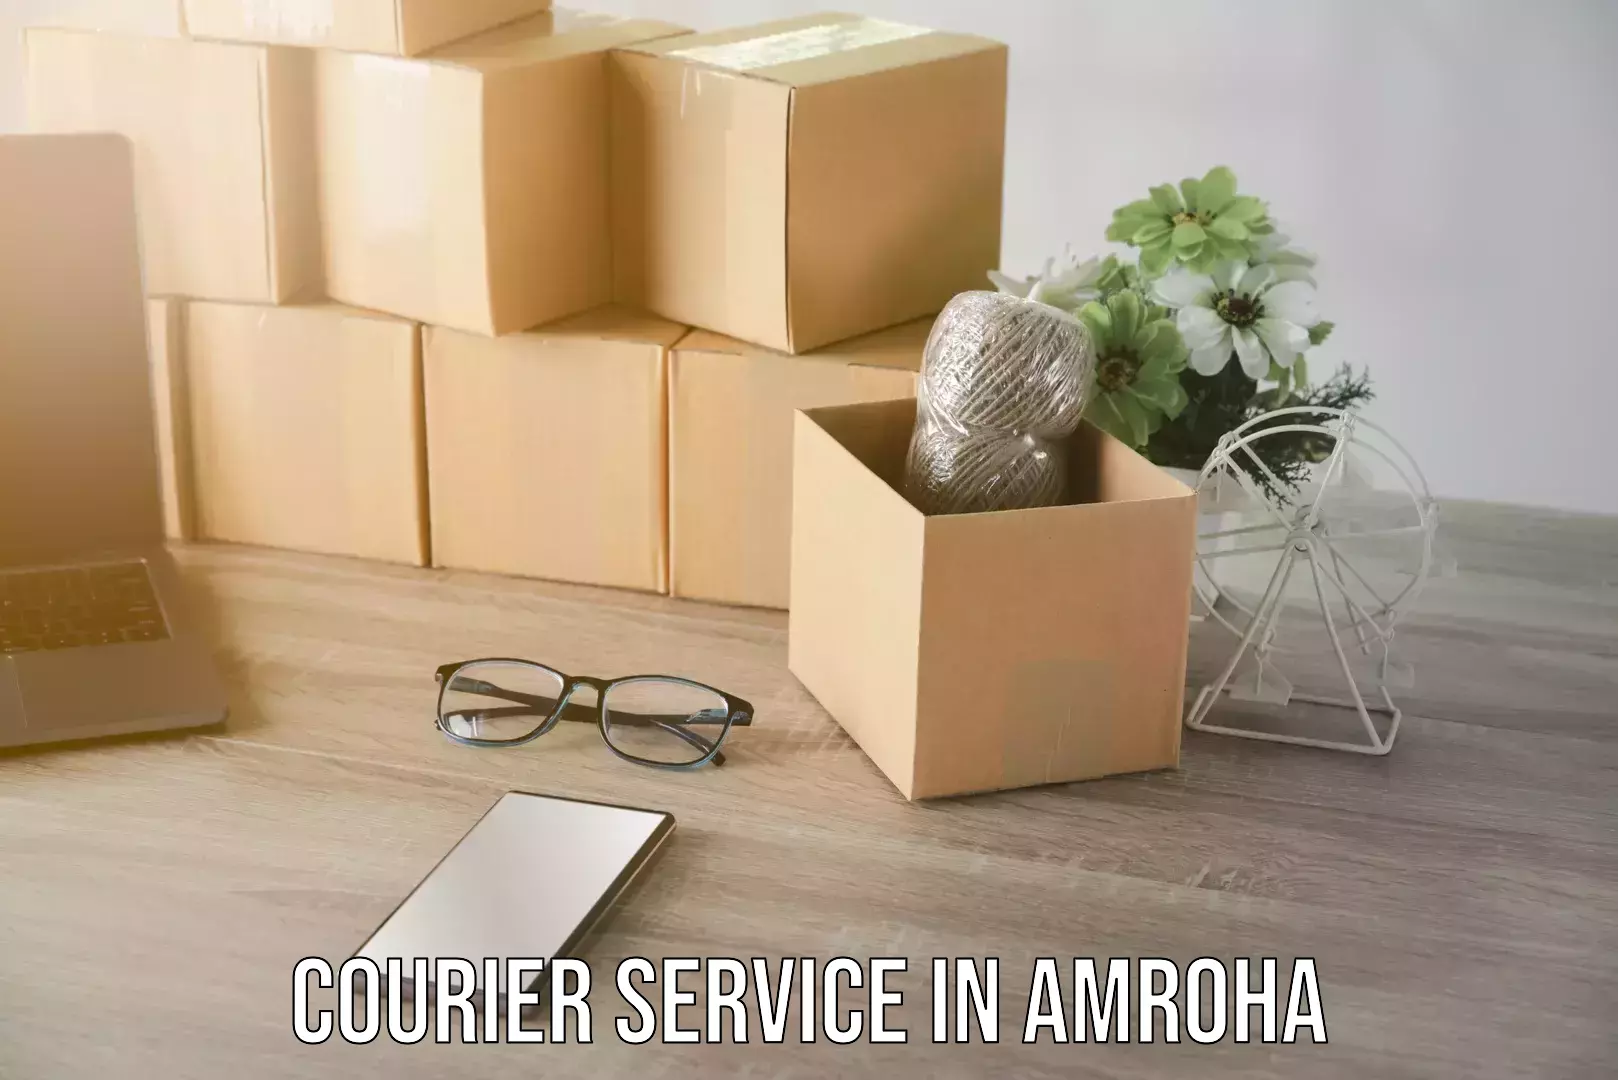 24/7 courier service in Amroha